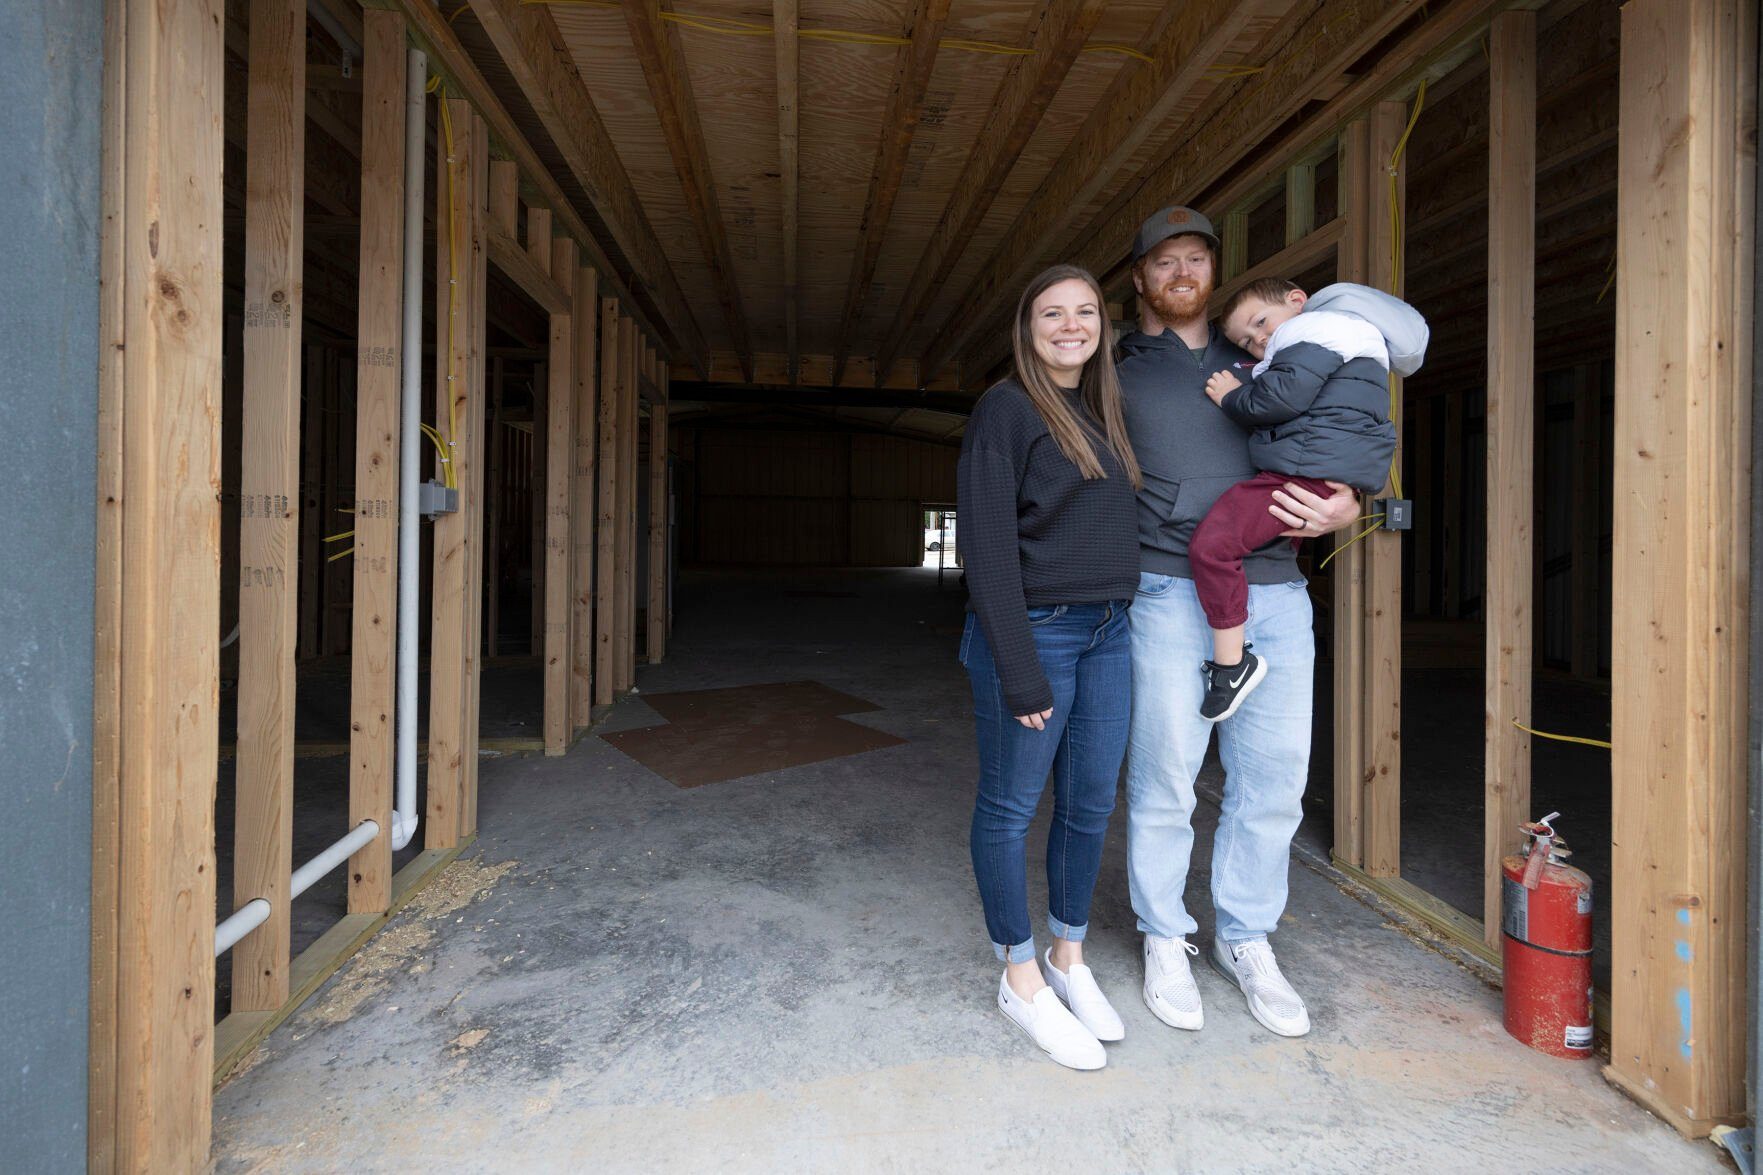 Owners Sammy (left), Spencer and son Jaxon Scar stand inside what will become Timber City Fitness in Maquoketa, Iowa.    PHOTO CREDIT: Stephen Gassman